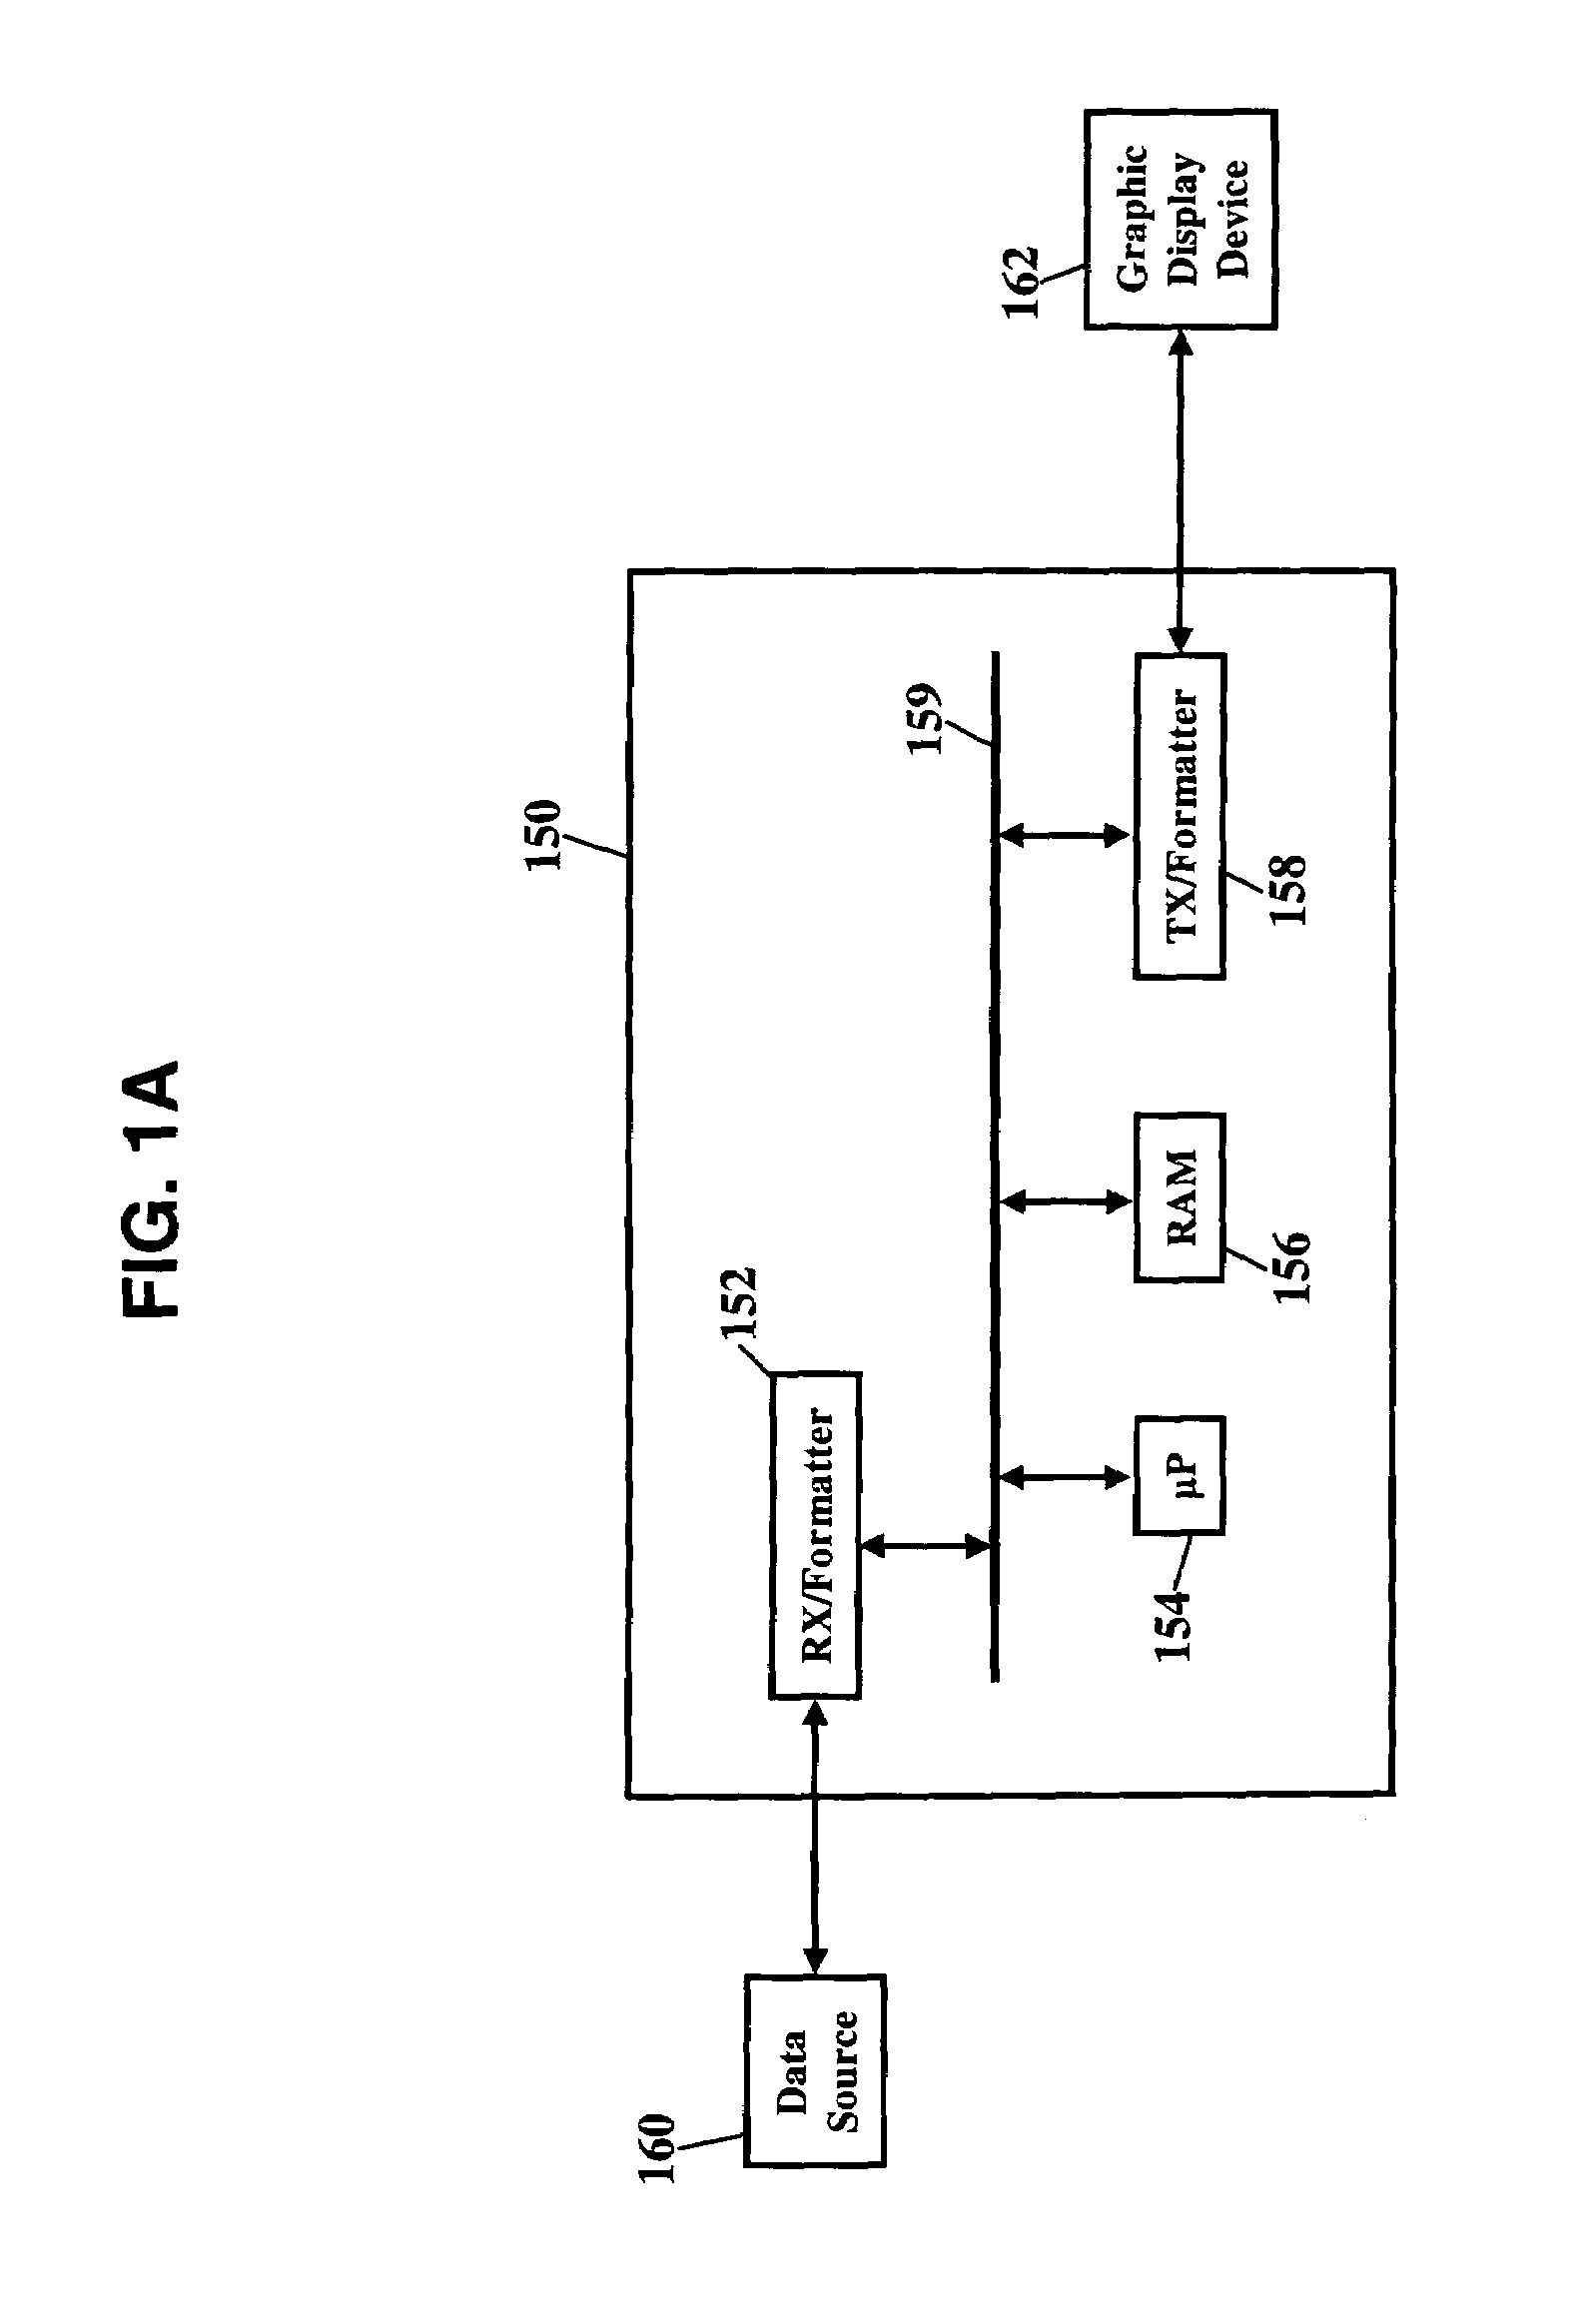 System and method for providing video services